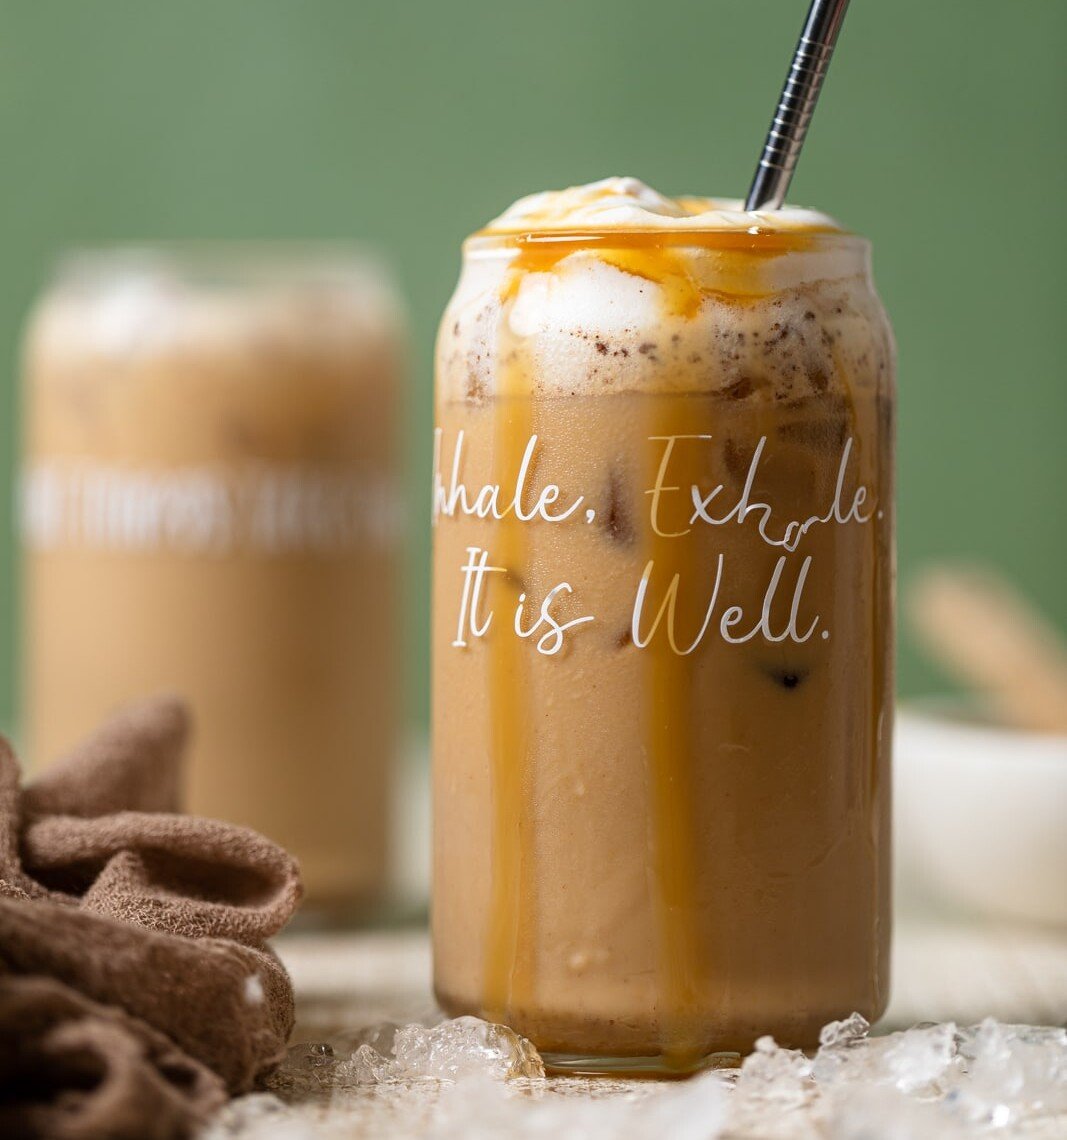 Peanut Butter Caramel Iced Latte in a glass with script that reads "Inhale. Exhale. It is Well."